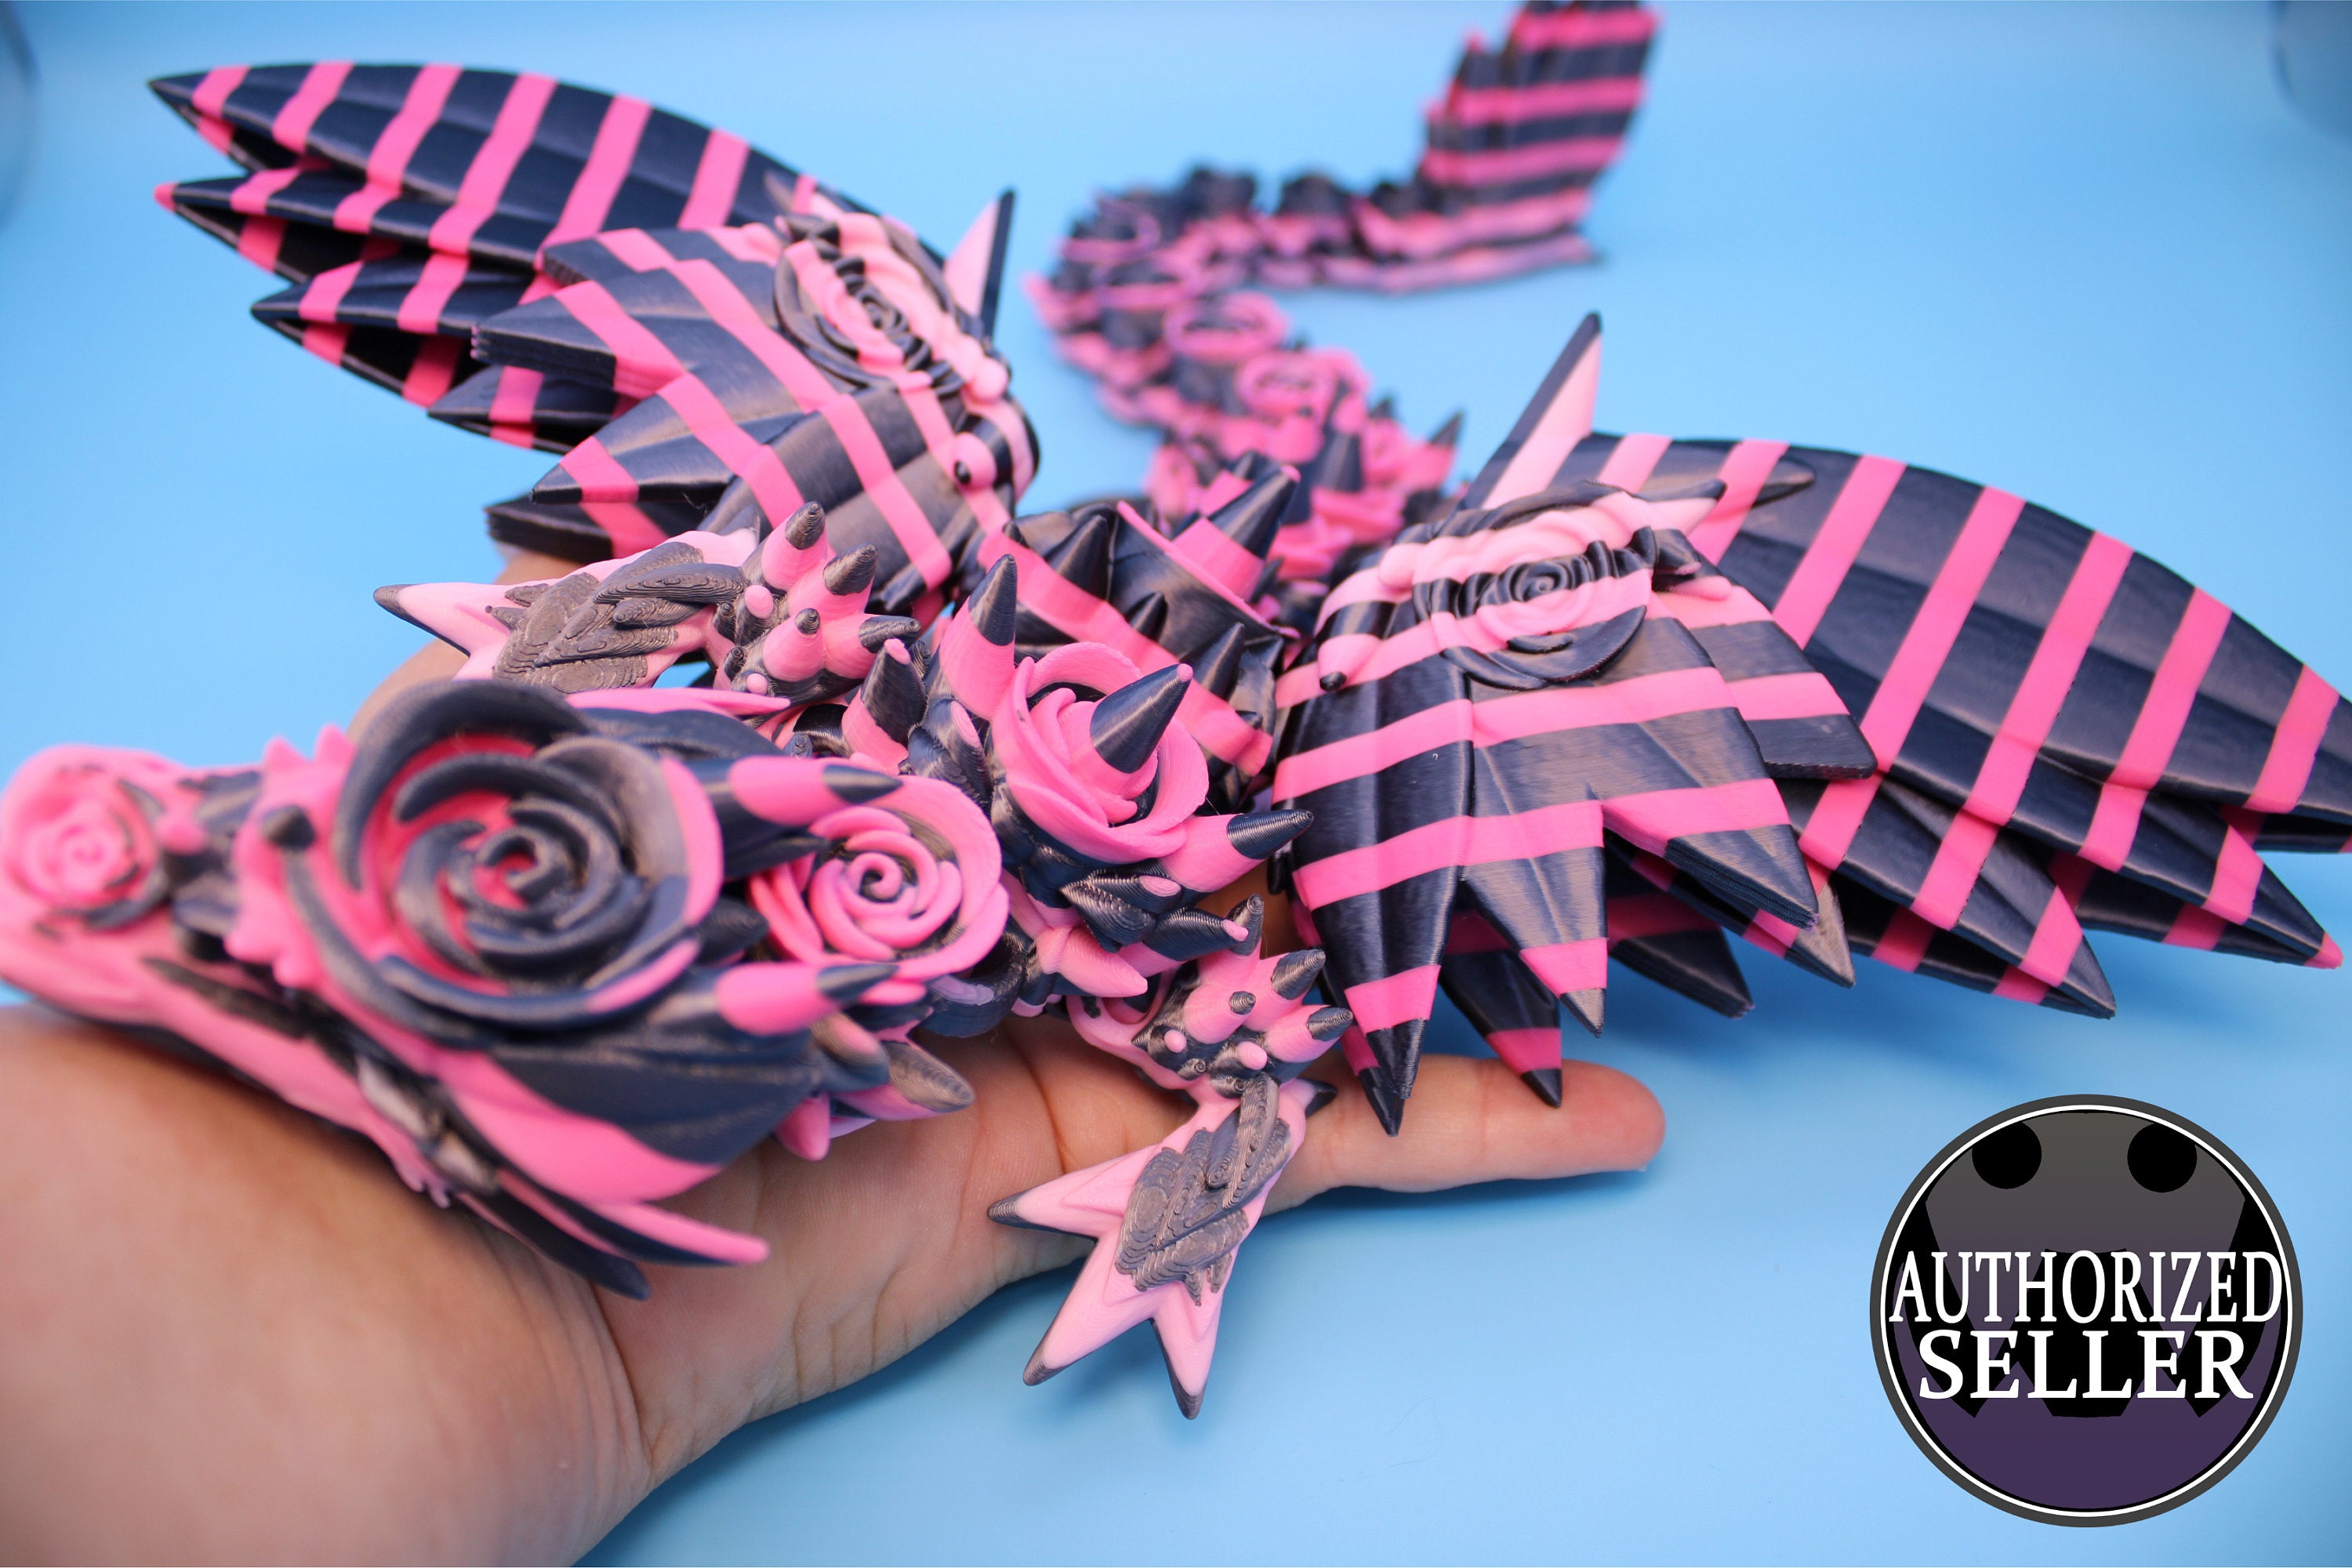 Beautiful Rose Wing Articulating Dragon | 3D Printed Fidget | Flexi Toy | Adult Fidget Toy | Sensory Desk Toy | 19 in. | Valentines Day